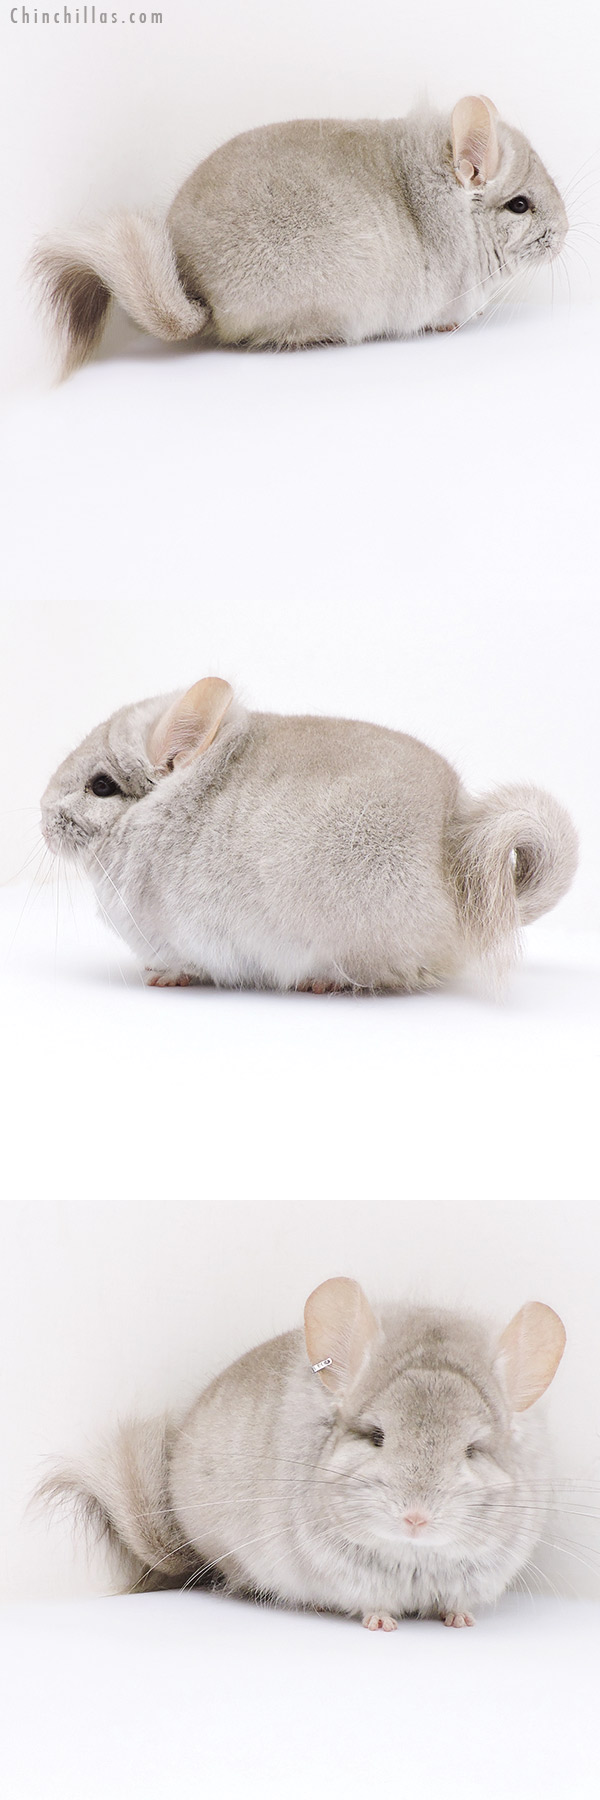 Chinchilla or related item offered for sale or export on Chinchillas.com - 19018 Exceptional Blocky Beige  Royal Persian Angora Male Chinchilla